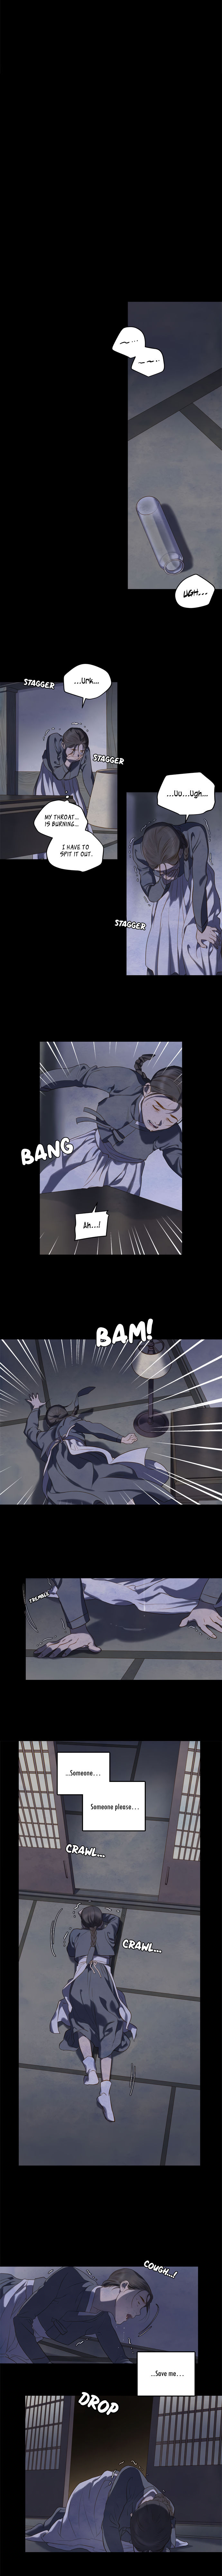 The Whale Star - The Gyeongseong Mermaid - Chapter 8 Page 7